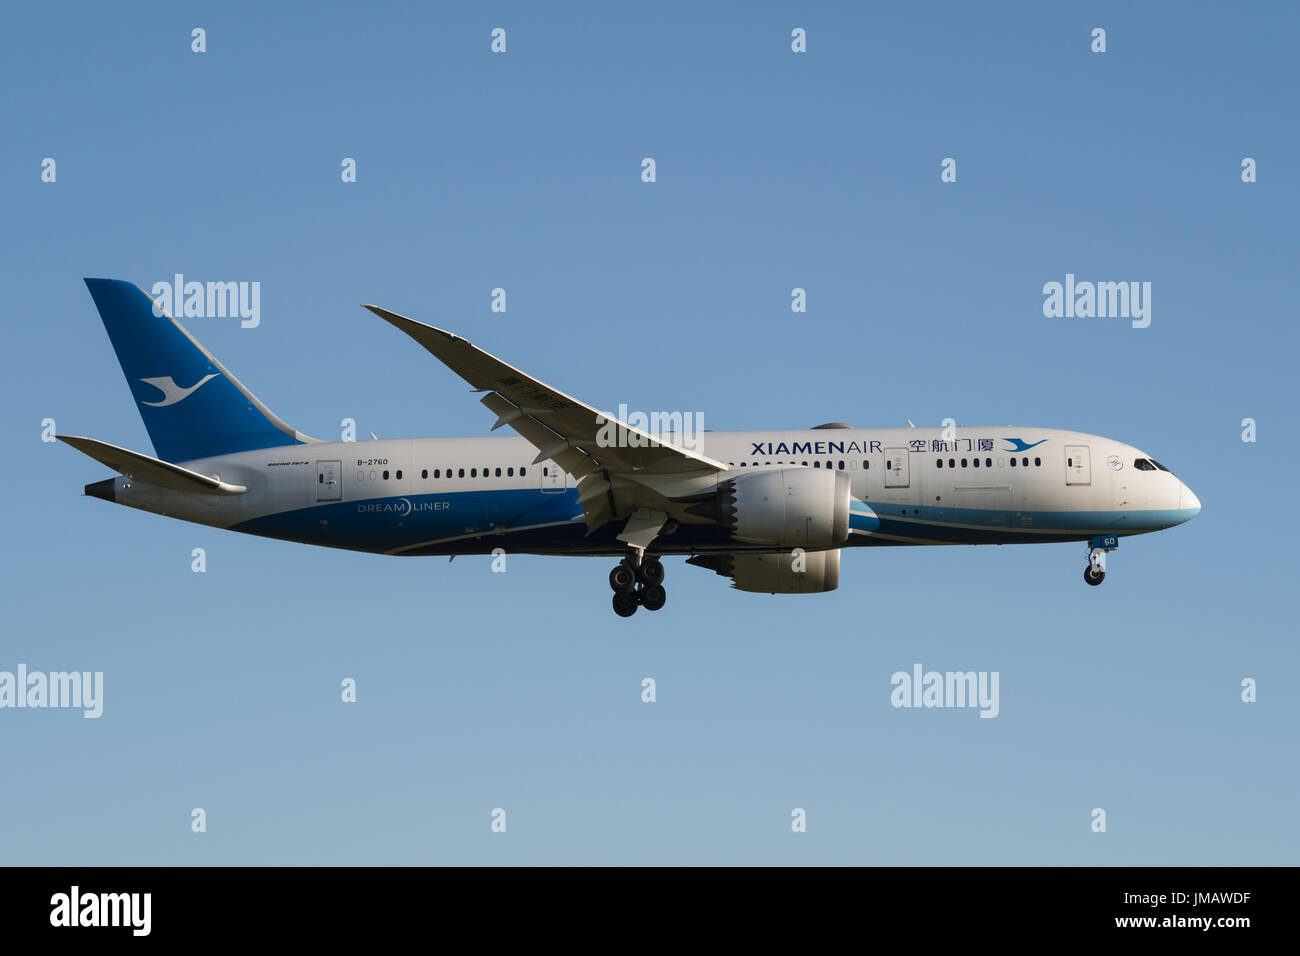 Richmond, British Columbia, Canada. 3rd July, 2017. A XiamenAir Boeing 787 (787-8) Dreamliner jet airliner on final approach for landing at Vancouver International Airport. Credit: Bayne Stanley/ZUMA Wire/Alamy Live News Stock Photo